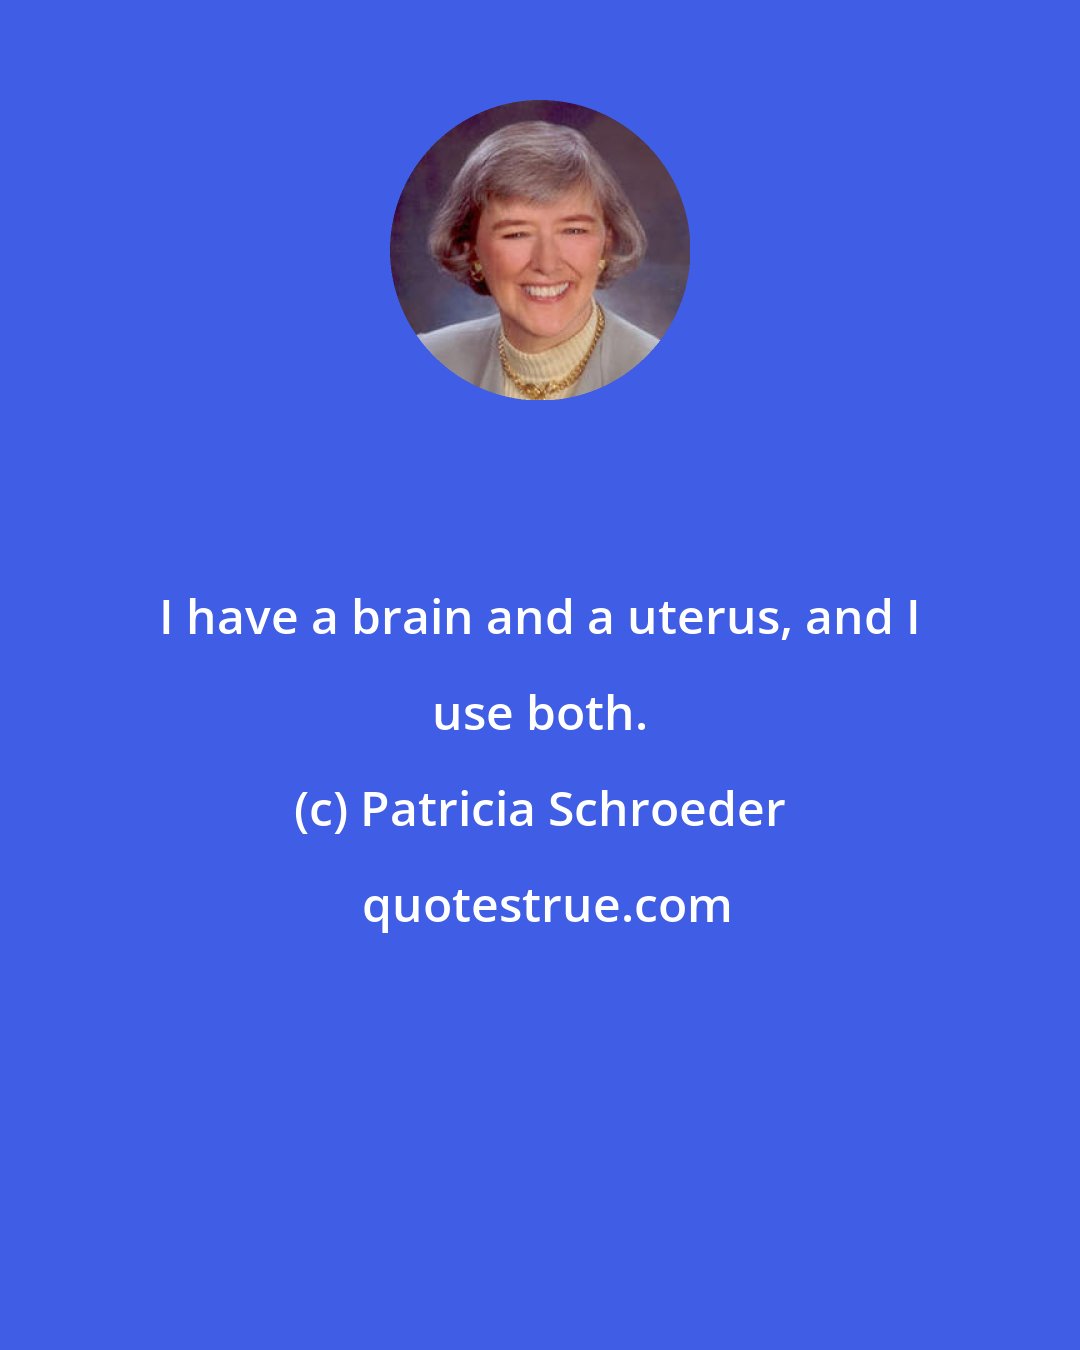 Patricia Schroeder: I have a brain and a uterus, and I use both.